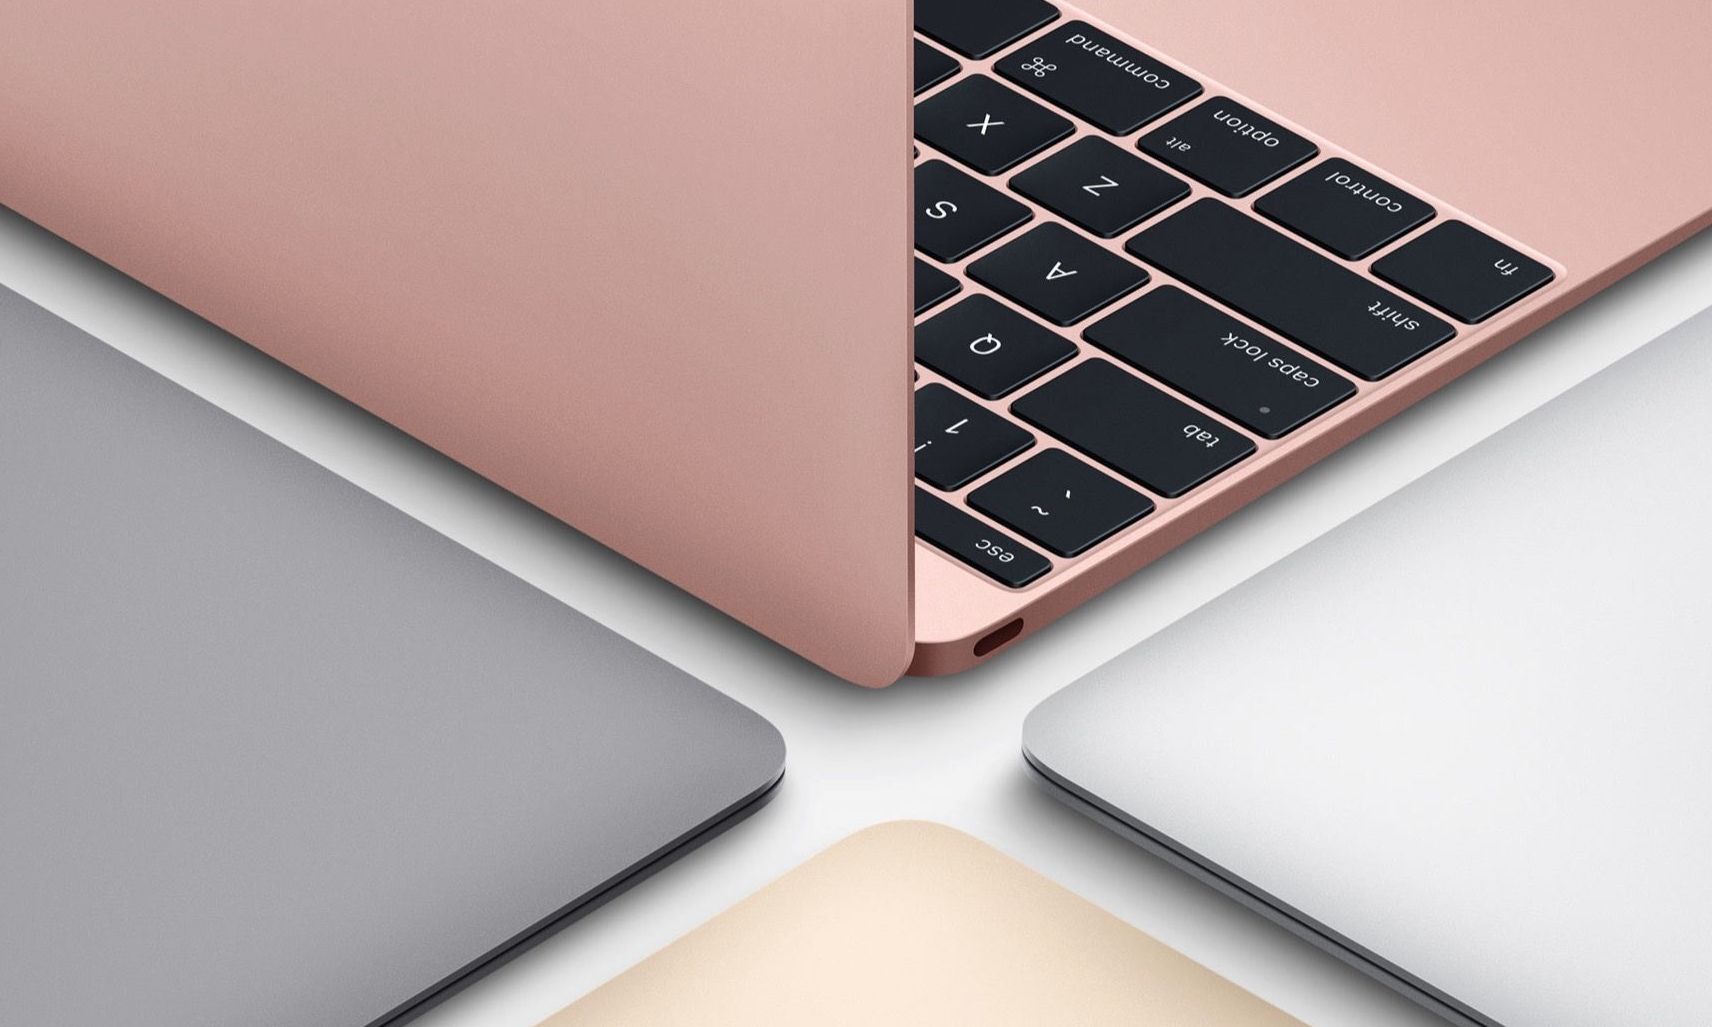 Put away Intel, where does Apple ’s confidence in launching the ARM MacBook come from?